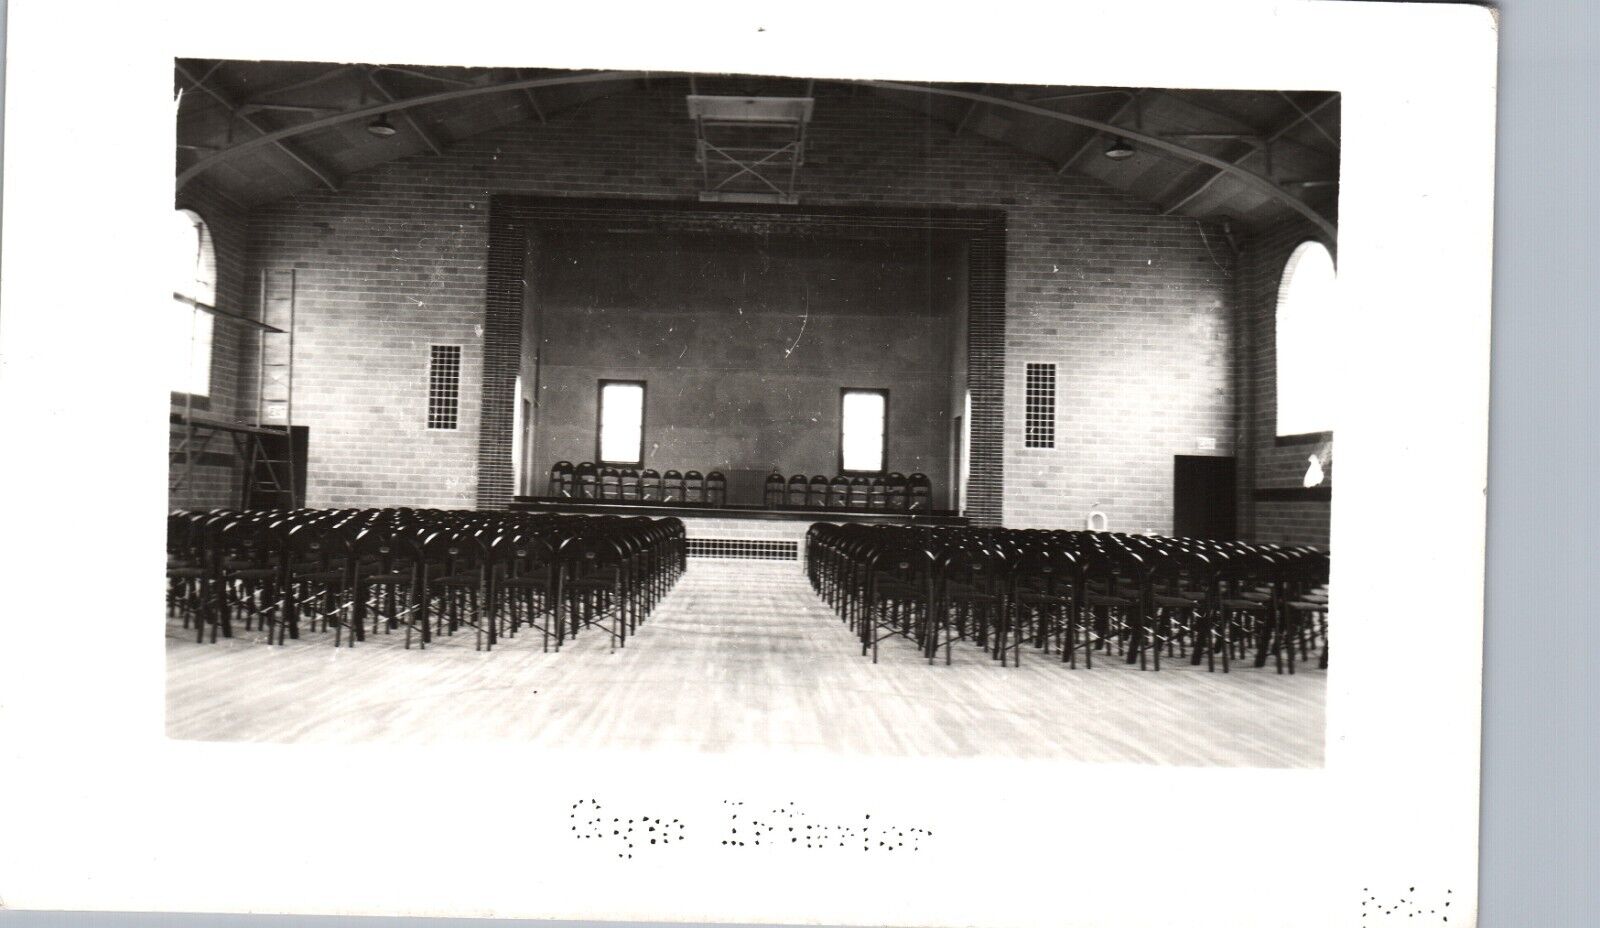 GYM INTERIOR plymouth wi real photo postcard rppc mission house college lakeland